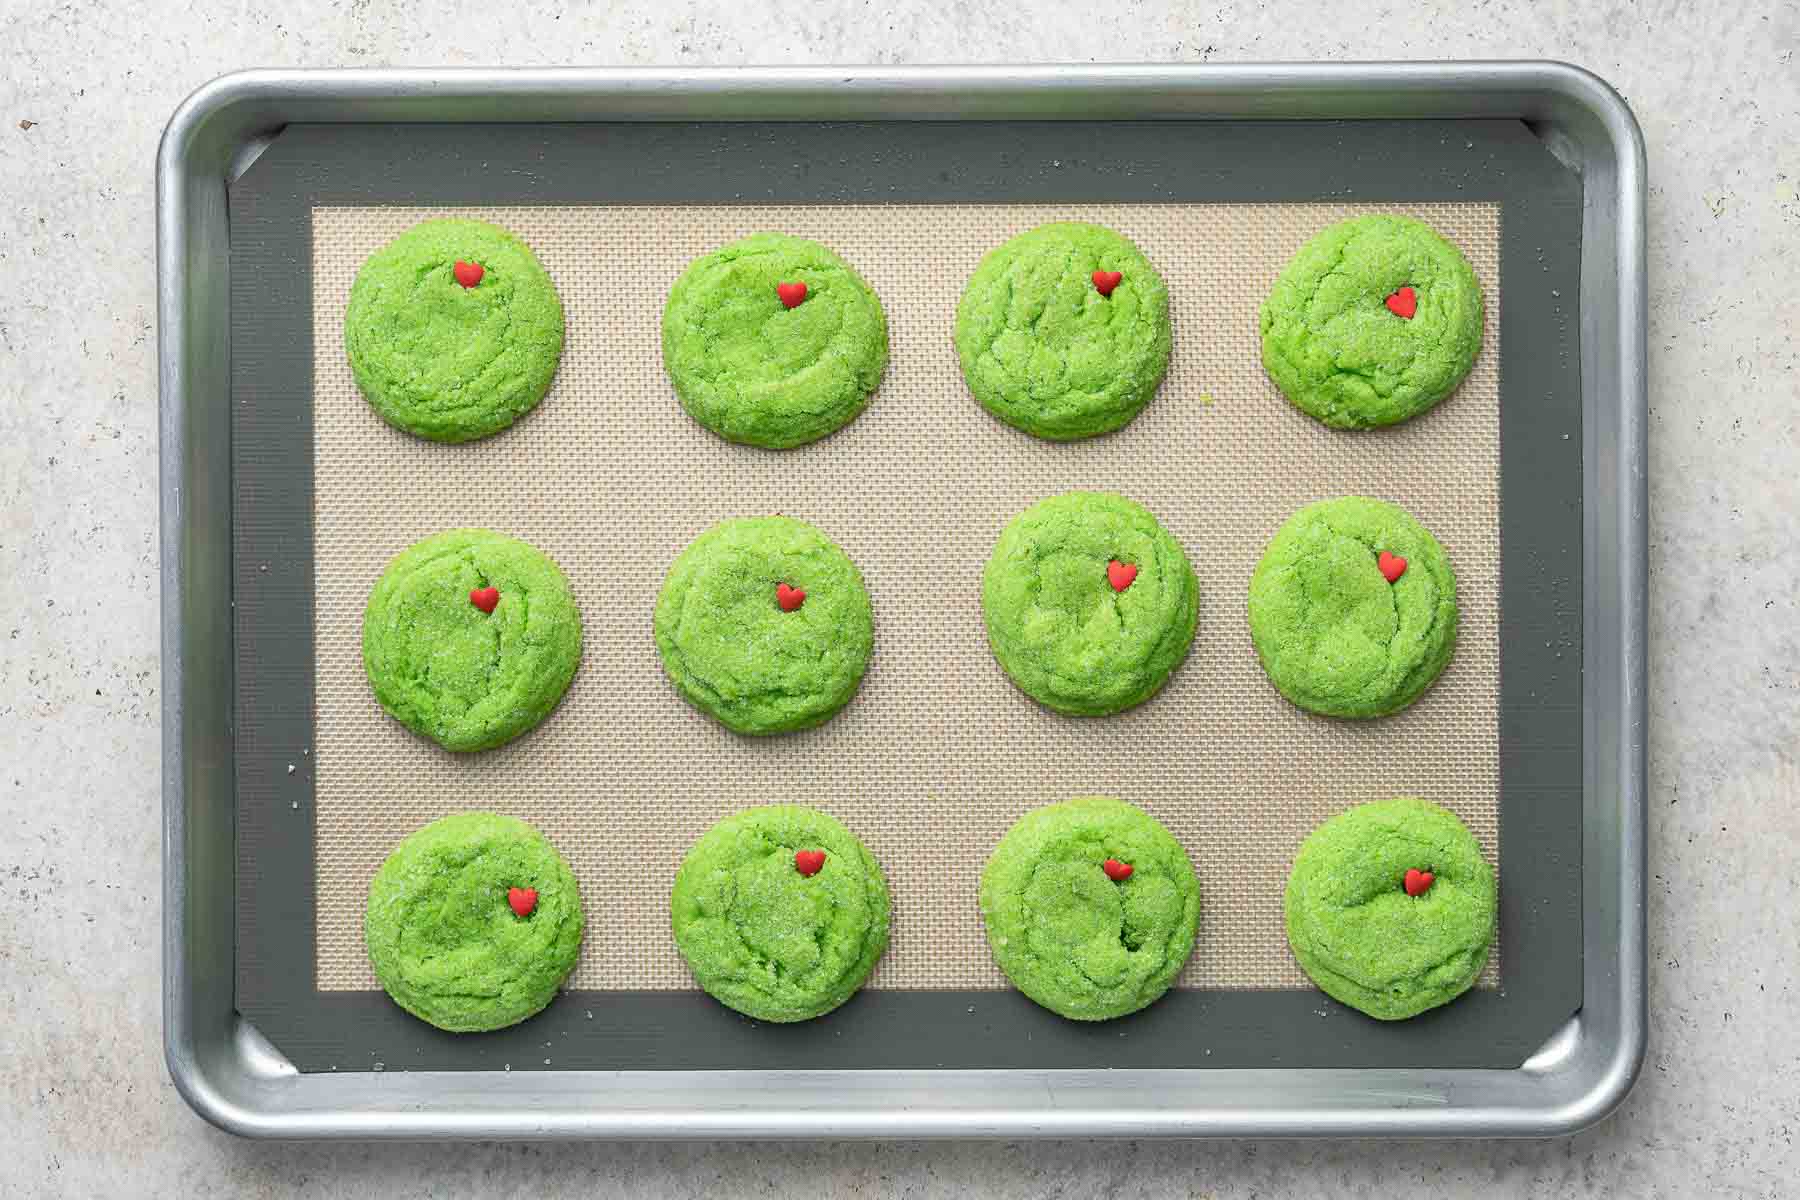 Pressing red heart shaped sprinkles into grinch sugar cookies after baking on baking sheet.